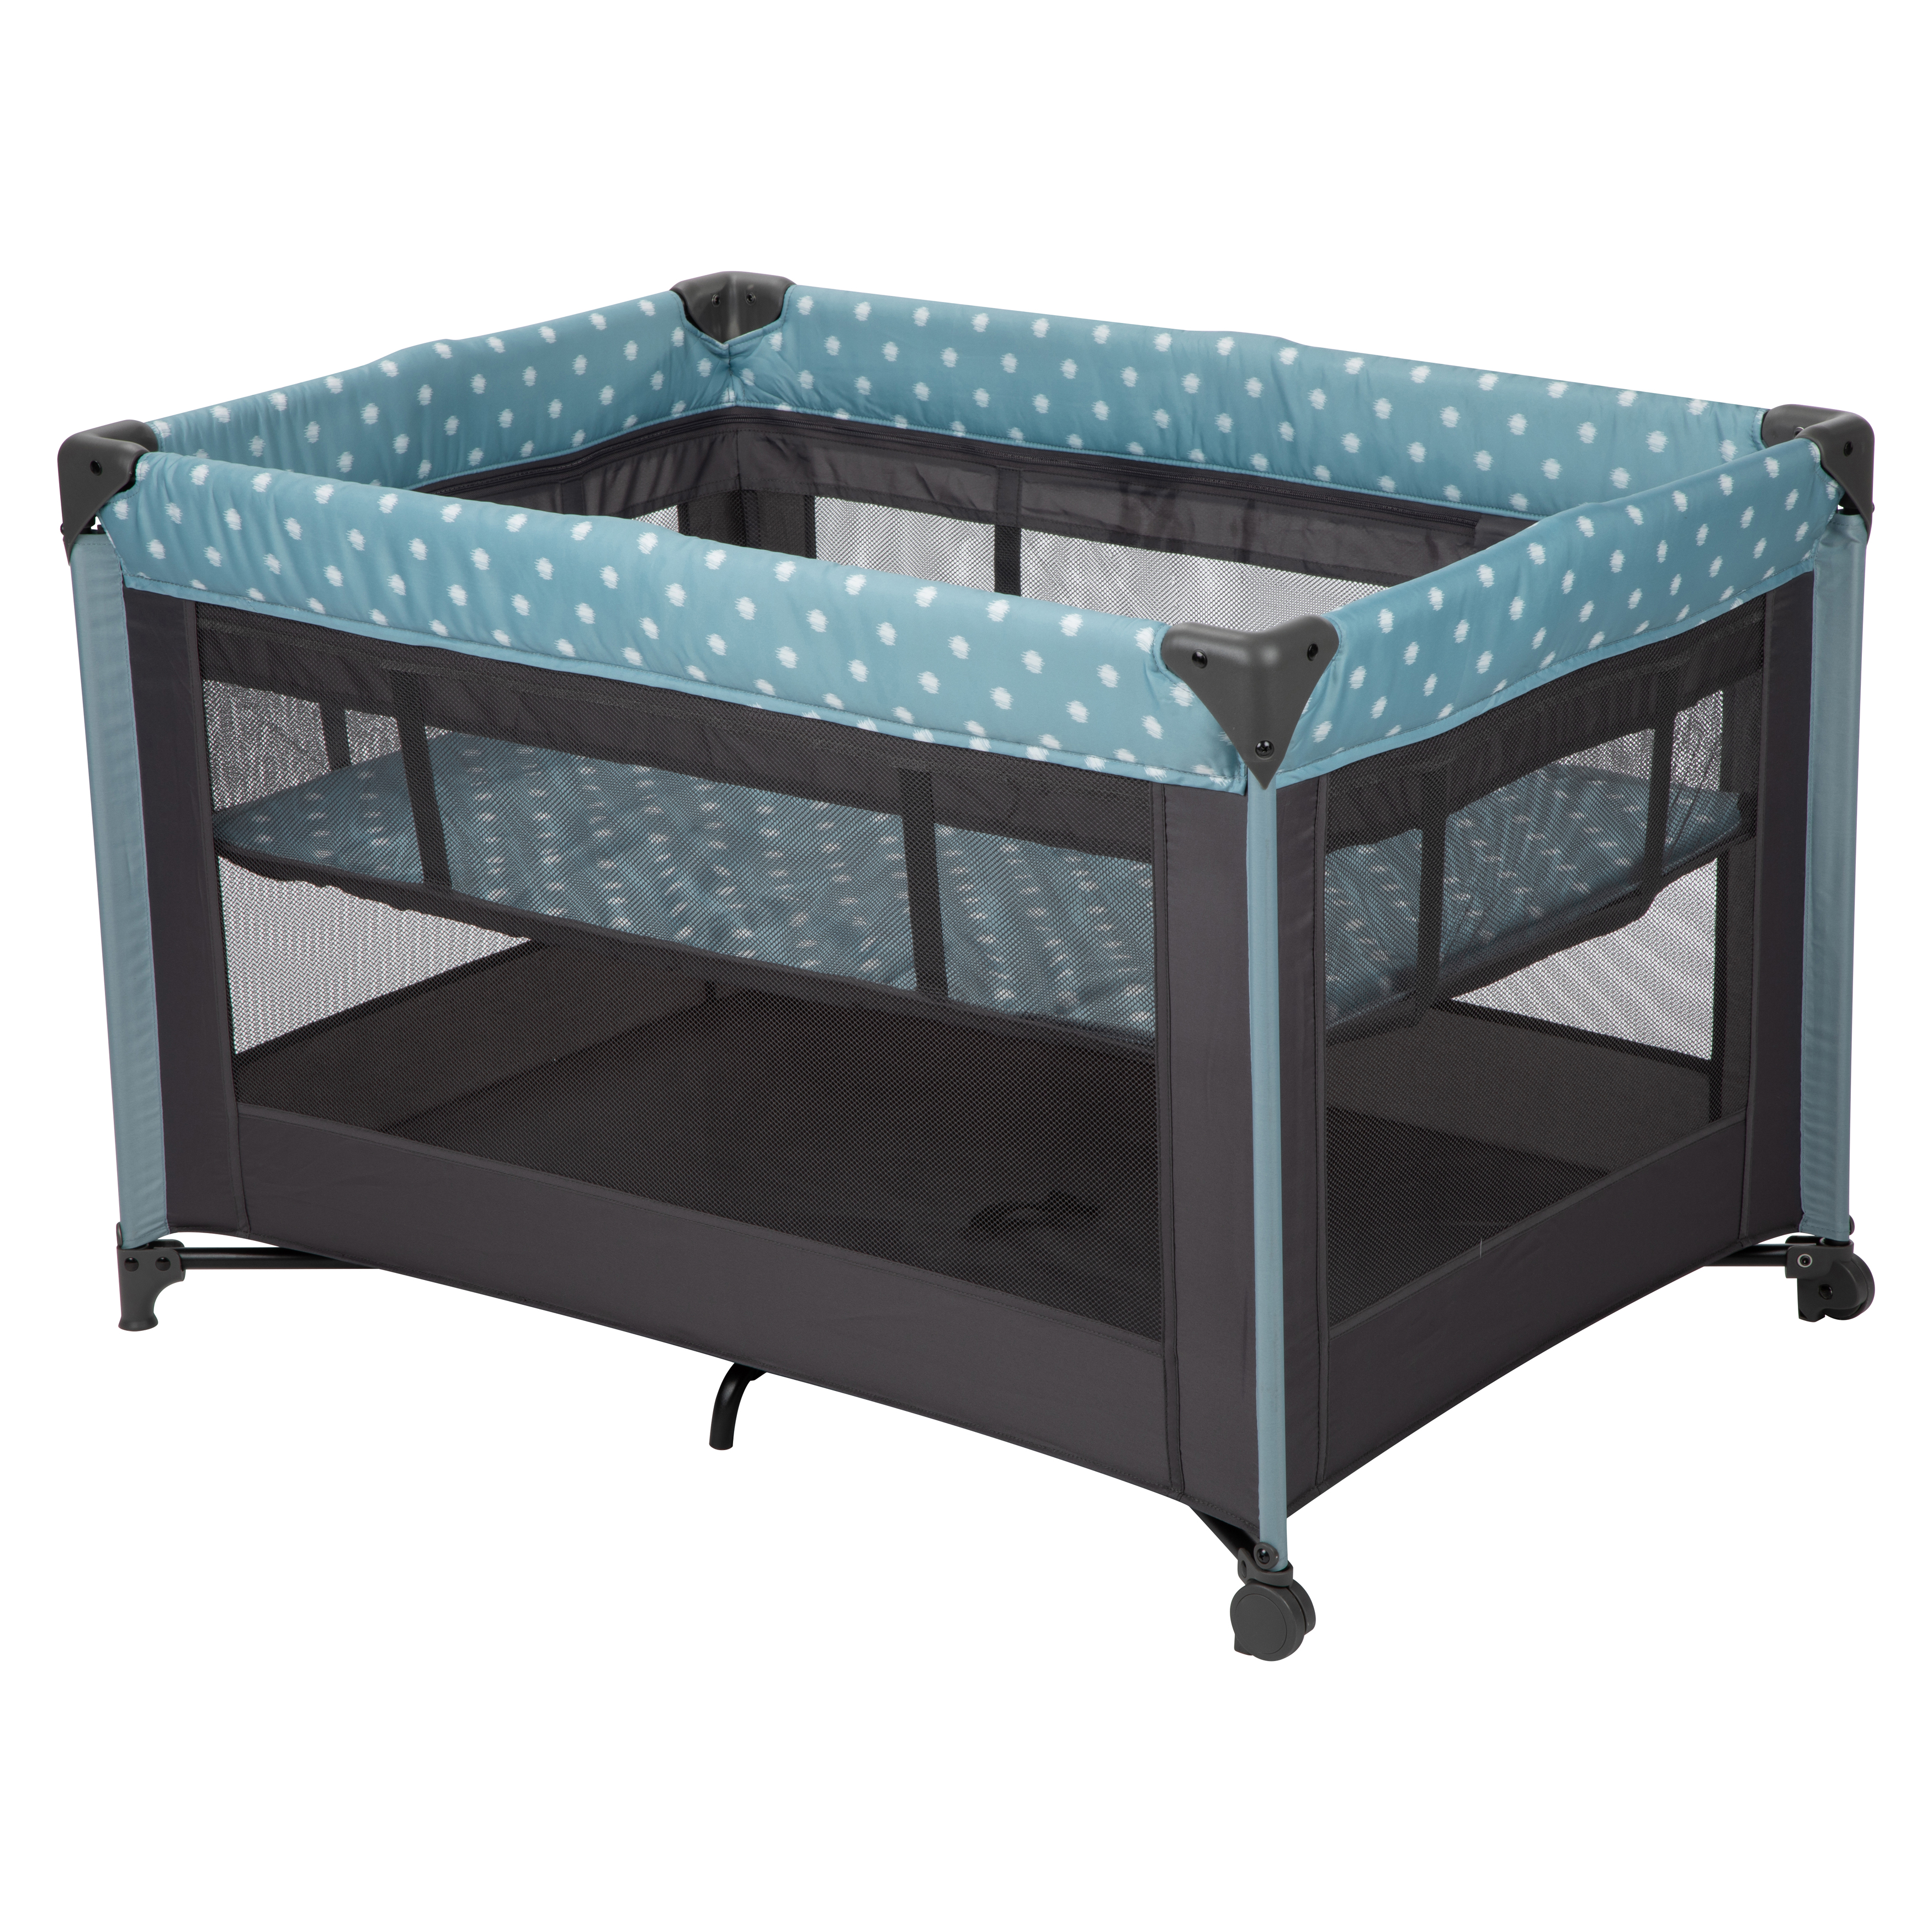 Babideal Dottie Baby Play Yard with Bassinet, Blue Dot - image 1 of 8